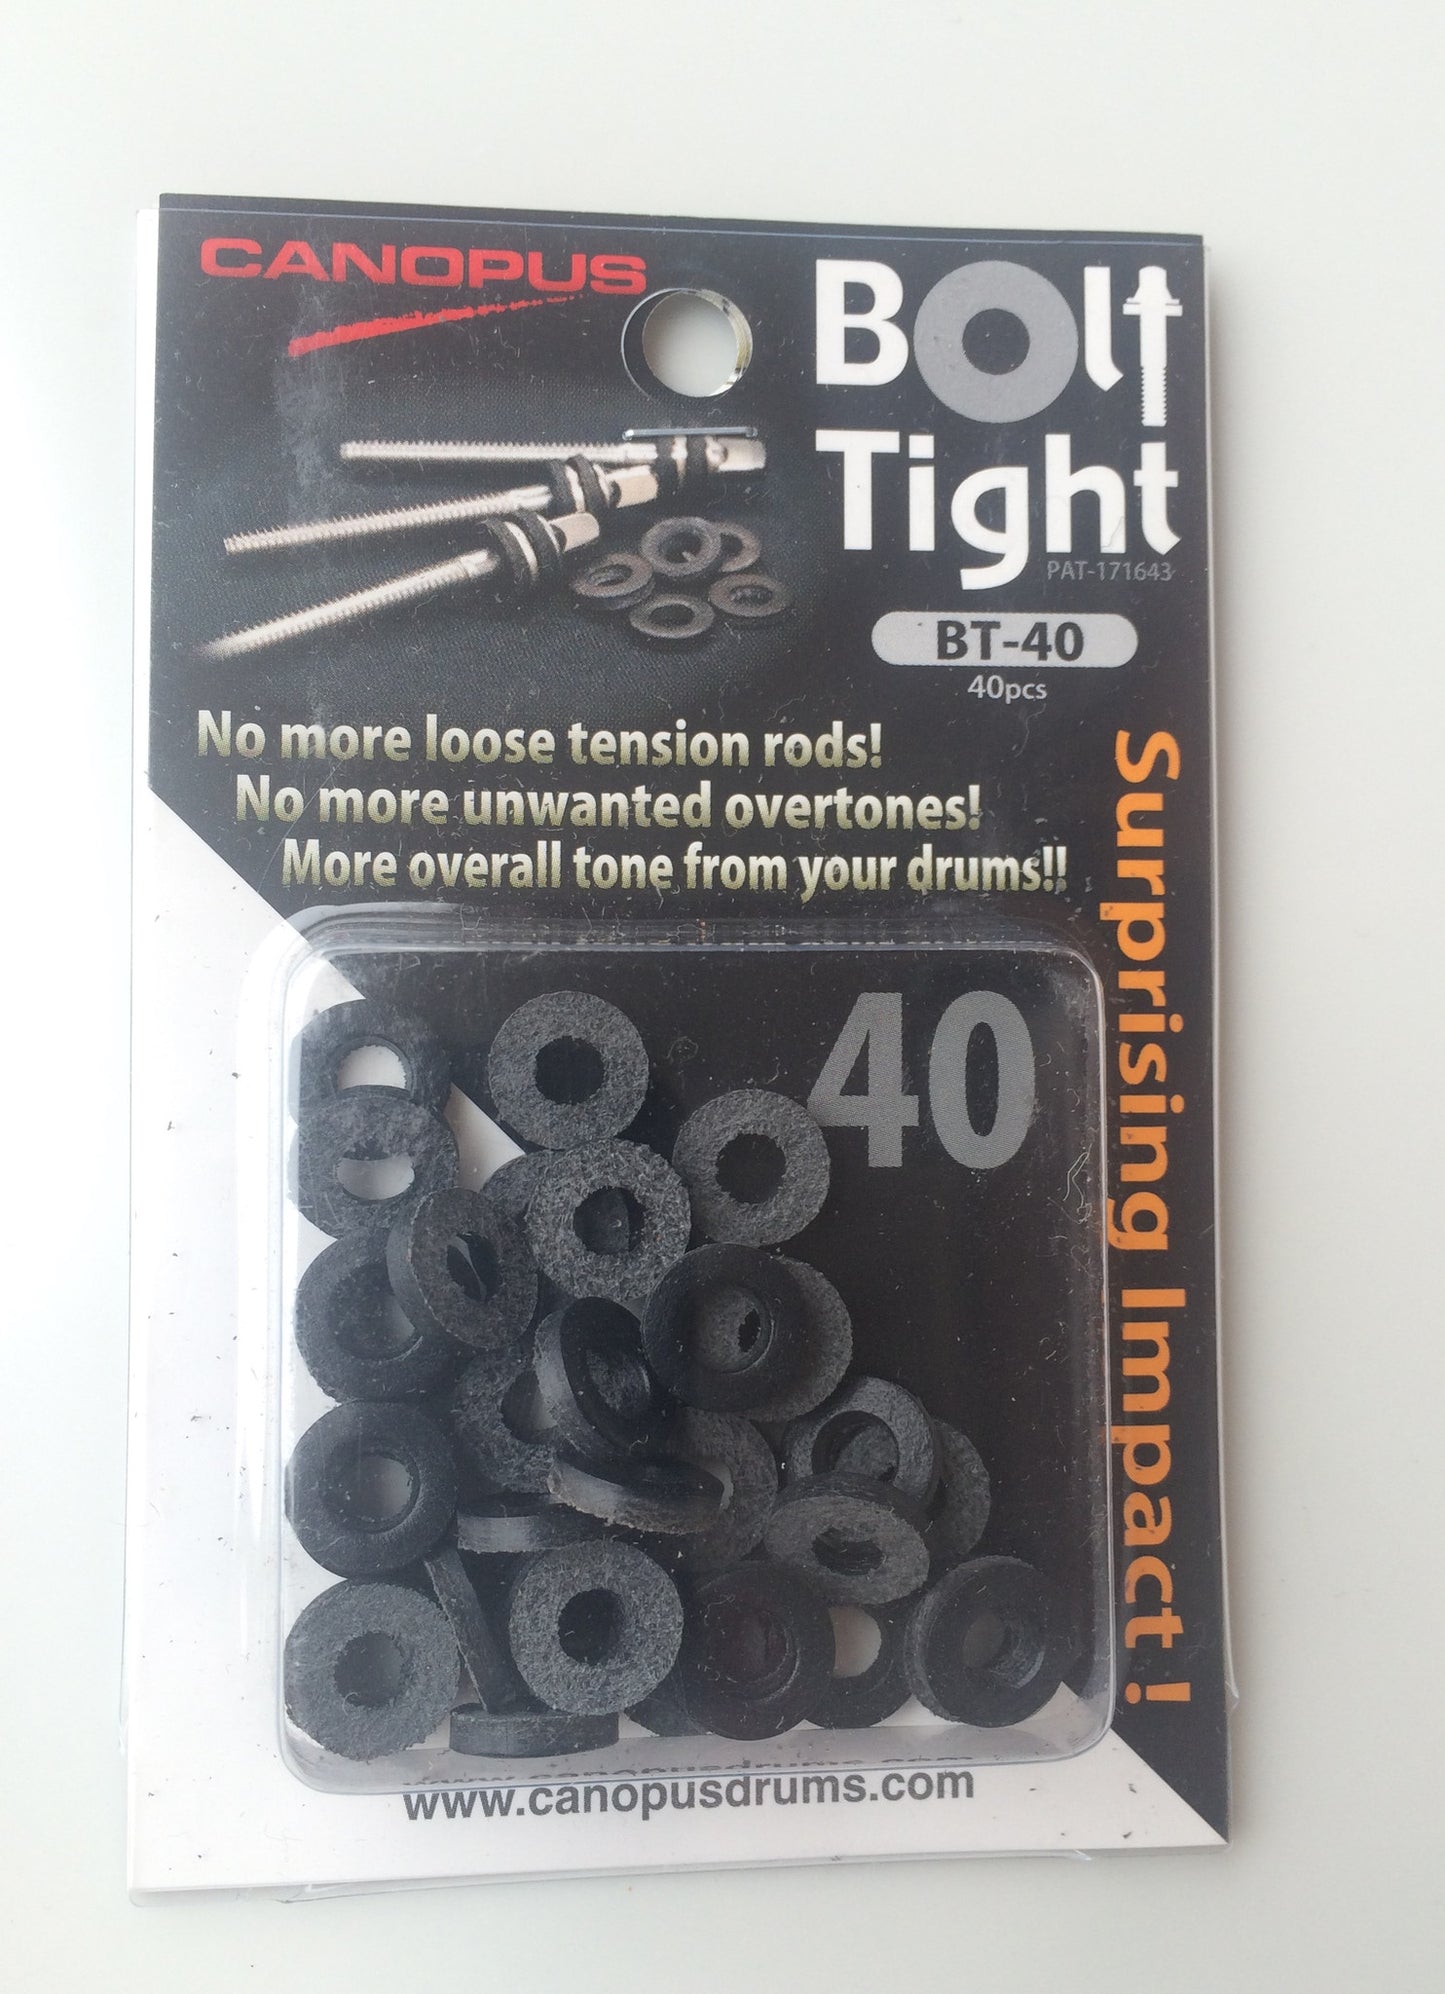 Canopus Bolt Tight for tension rods - New Lower Price!